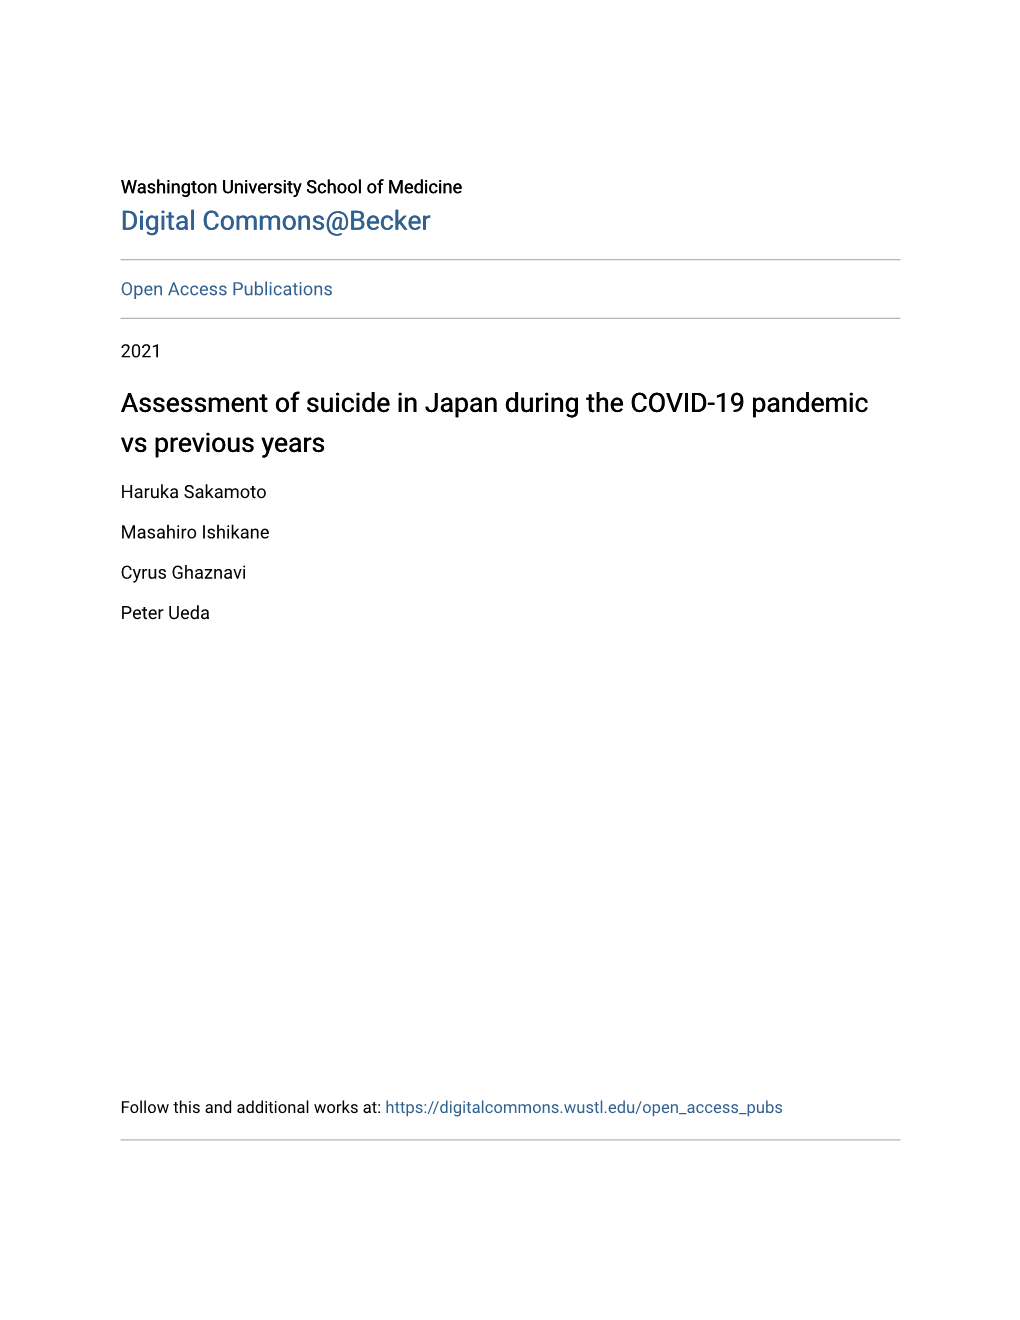 Assessment of Suicide in Japan During the COVID-19 Pandemic Vs Previous Years